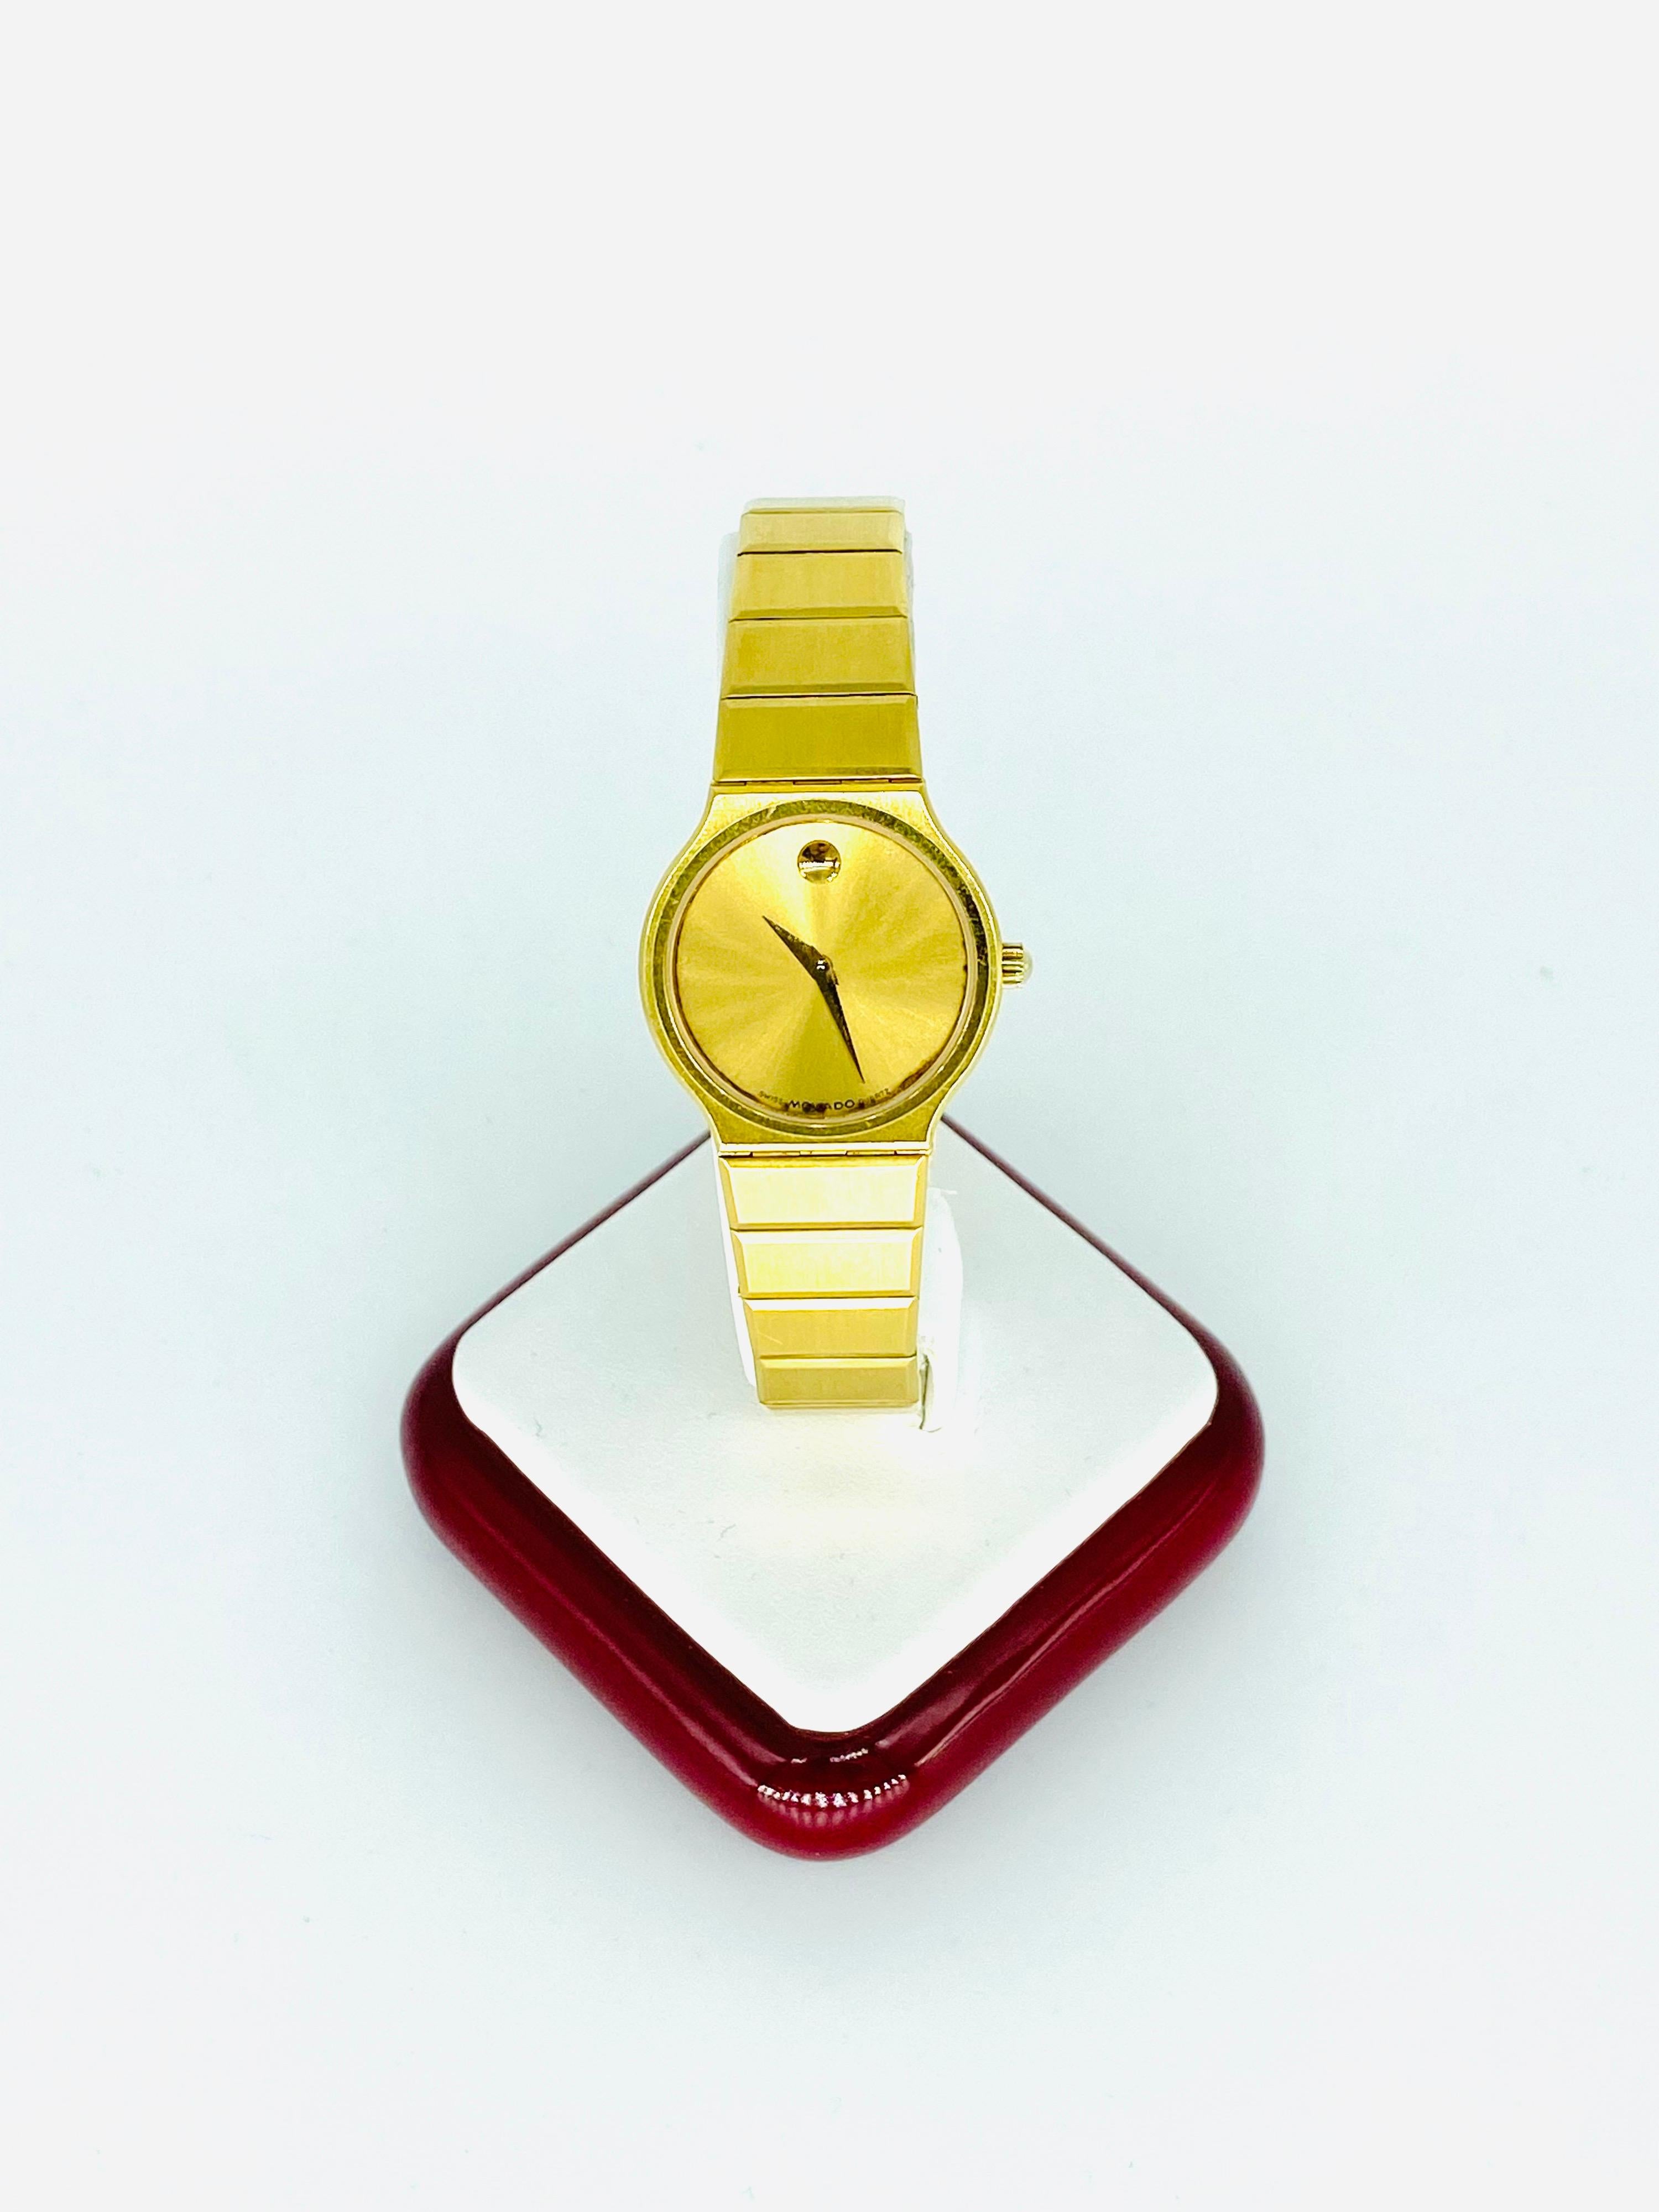 Basic Info:
Brand	Movado
Model	Museum
Reference number	ref.Saphire n C80 - 40-40-884/RGlox - LTD ref. n 144
Movement	Quartz
Case material	Yellow gold
Bracelet material	Yellow gold
Year of production	1990 (Approximation)
Gender	Women's